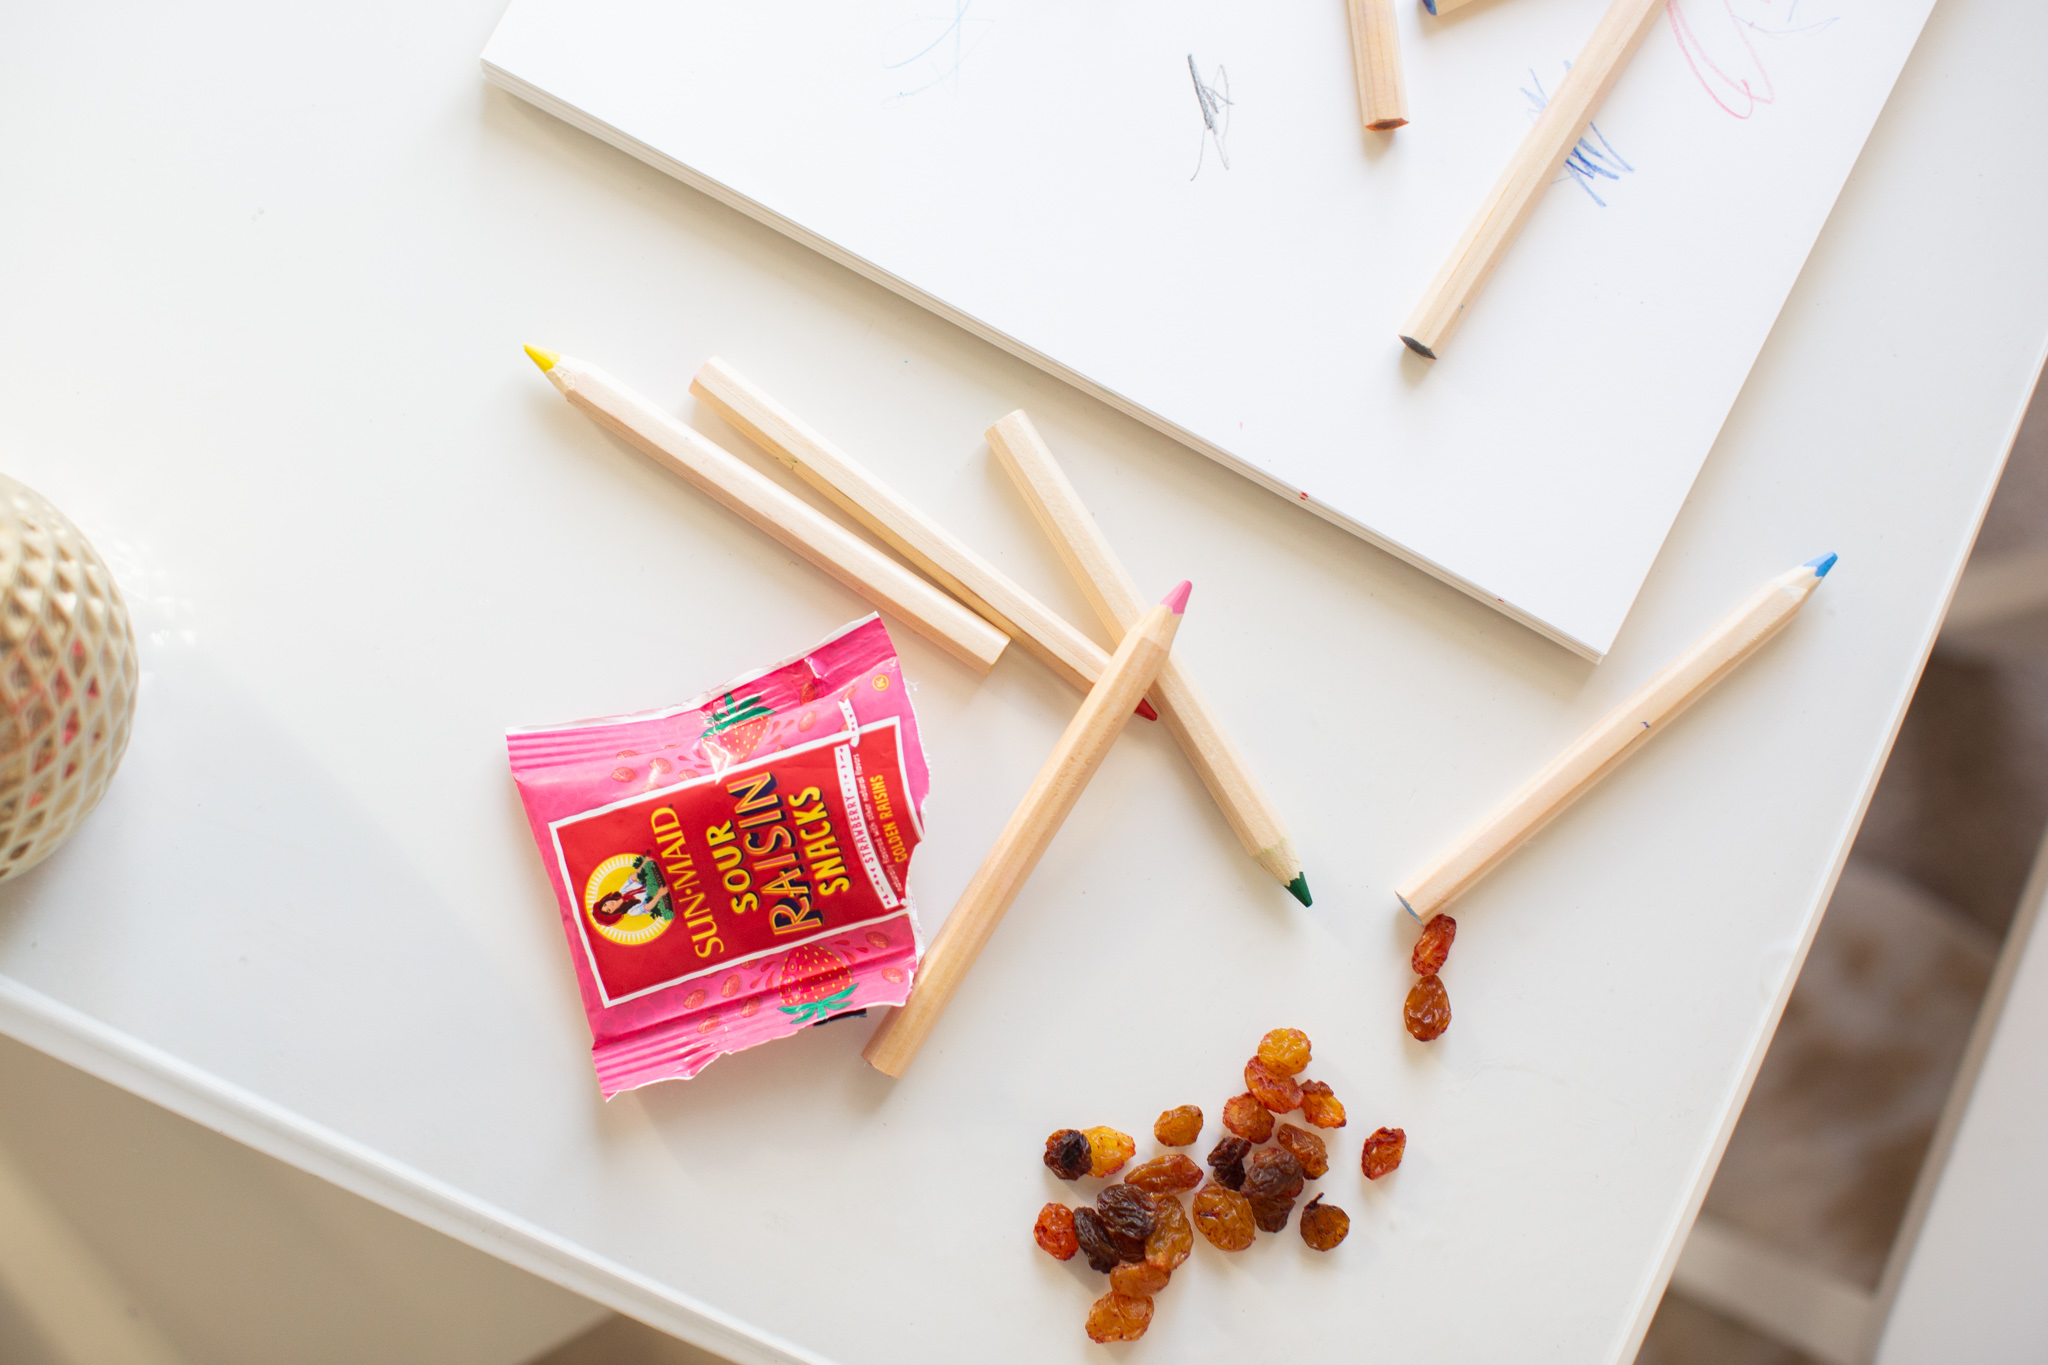 Quick Snacks for Toddlers by popular Ohio mom blog, Coffee Beans and Bobby Pins: image of a little girl sitting at a table and coloring with colored pencils and eating Sun-Maid Sour Raisin snacks. 